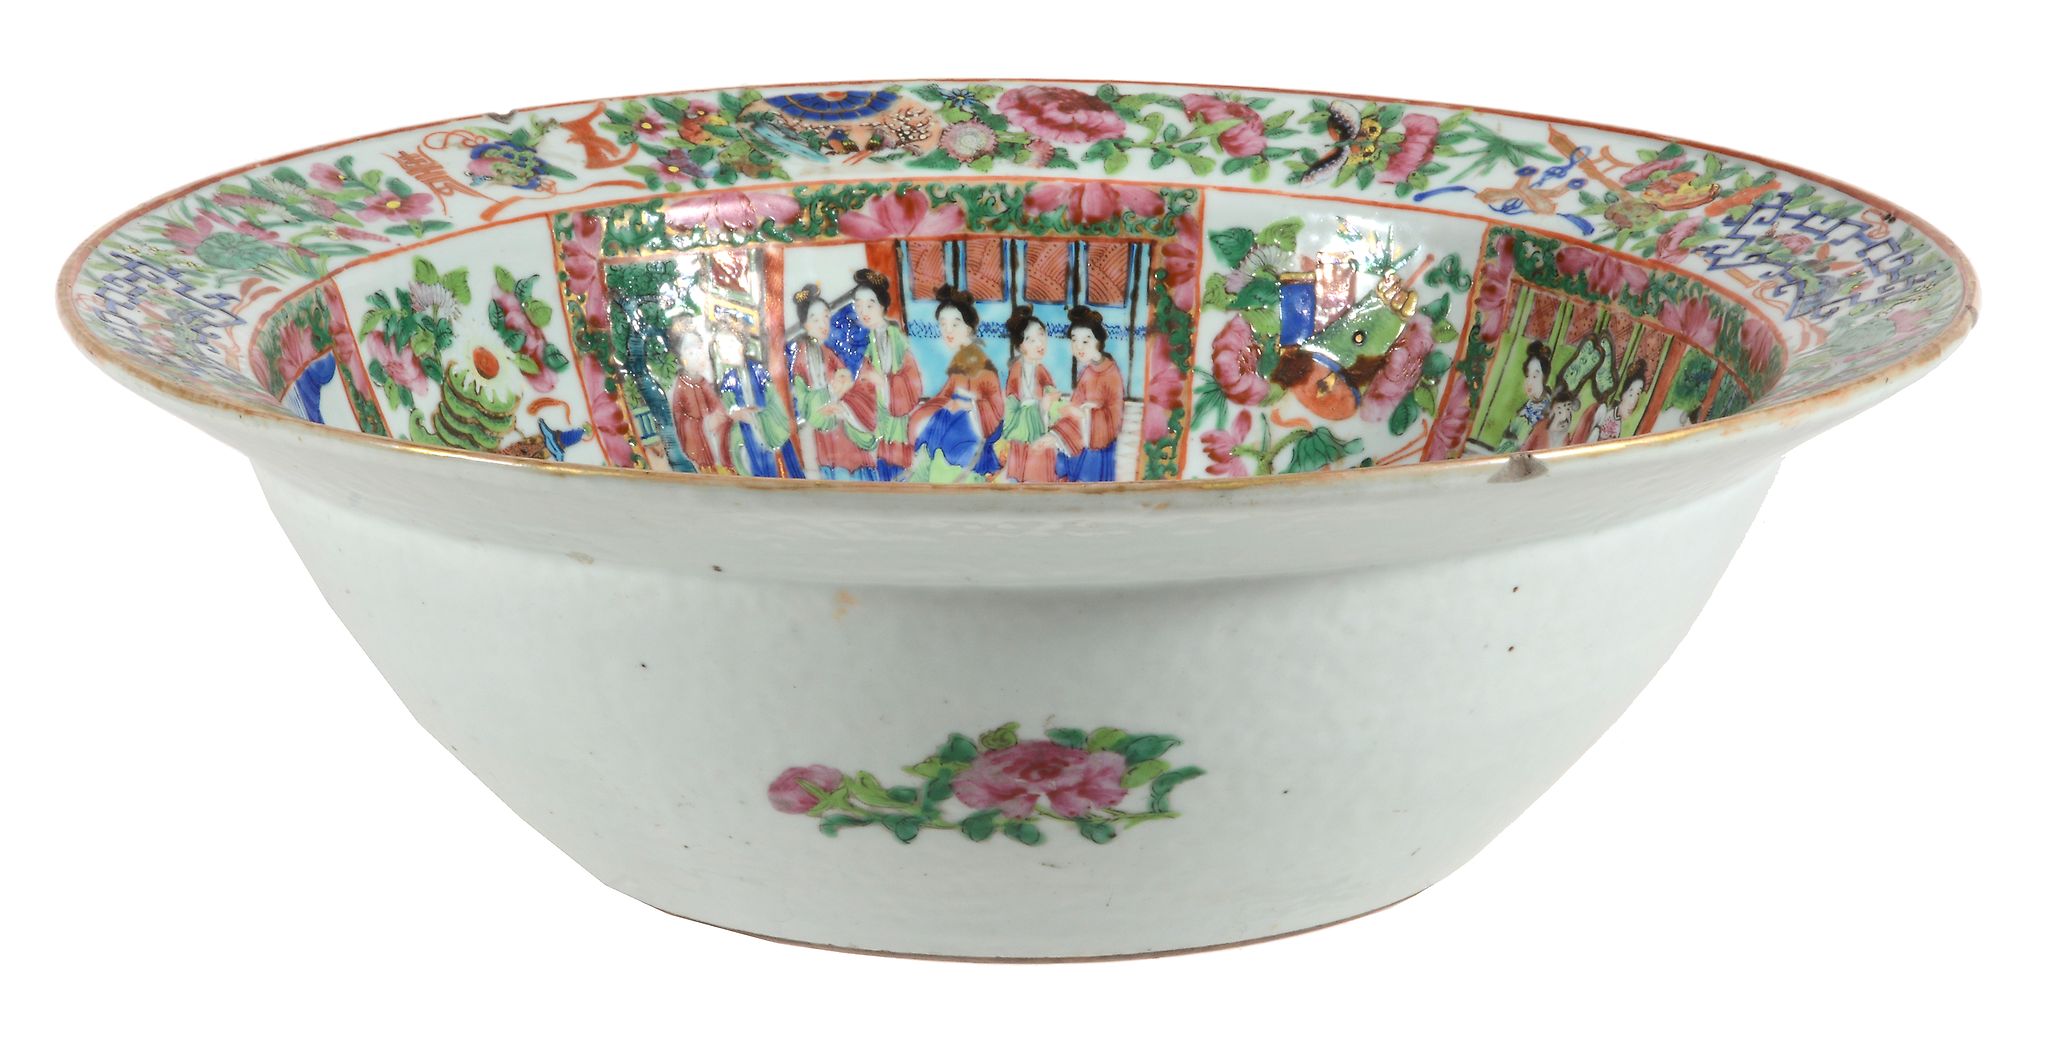 A large Cantonese basin, circa 1860, typically painted with panels of figures  A large Cantonese